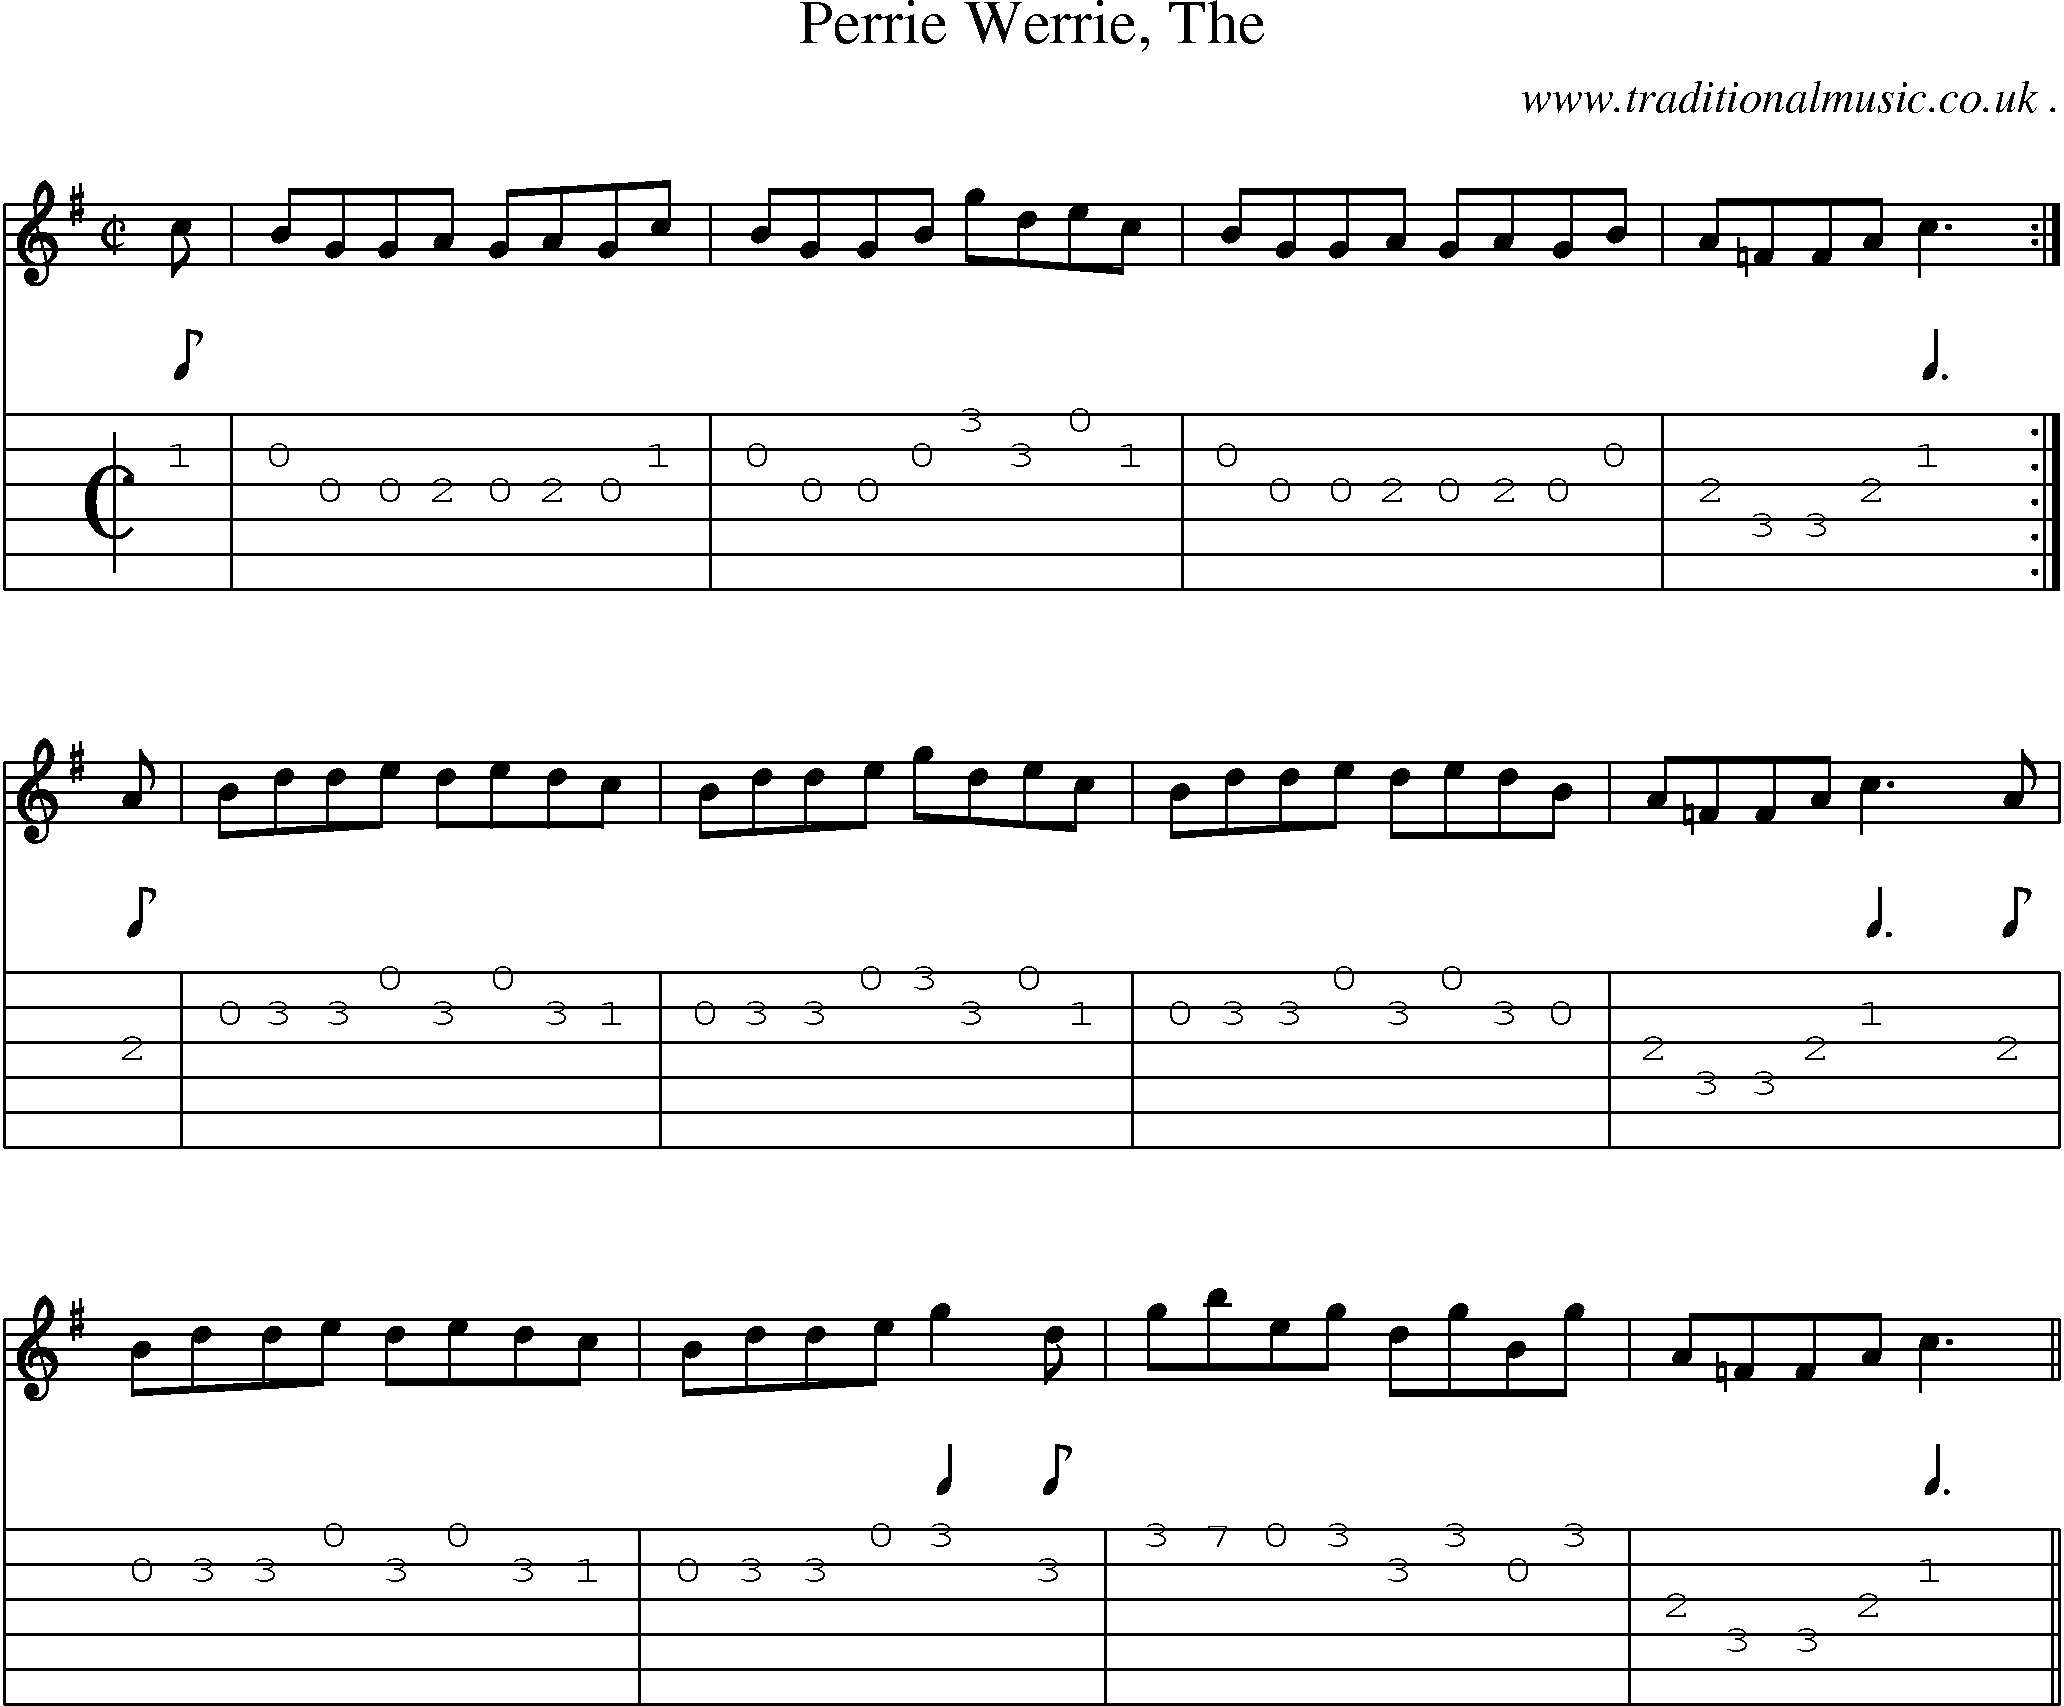 Sheet-music  score, Chords and Guitar Tabs for Perrie Werrie The